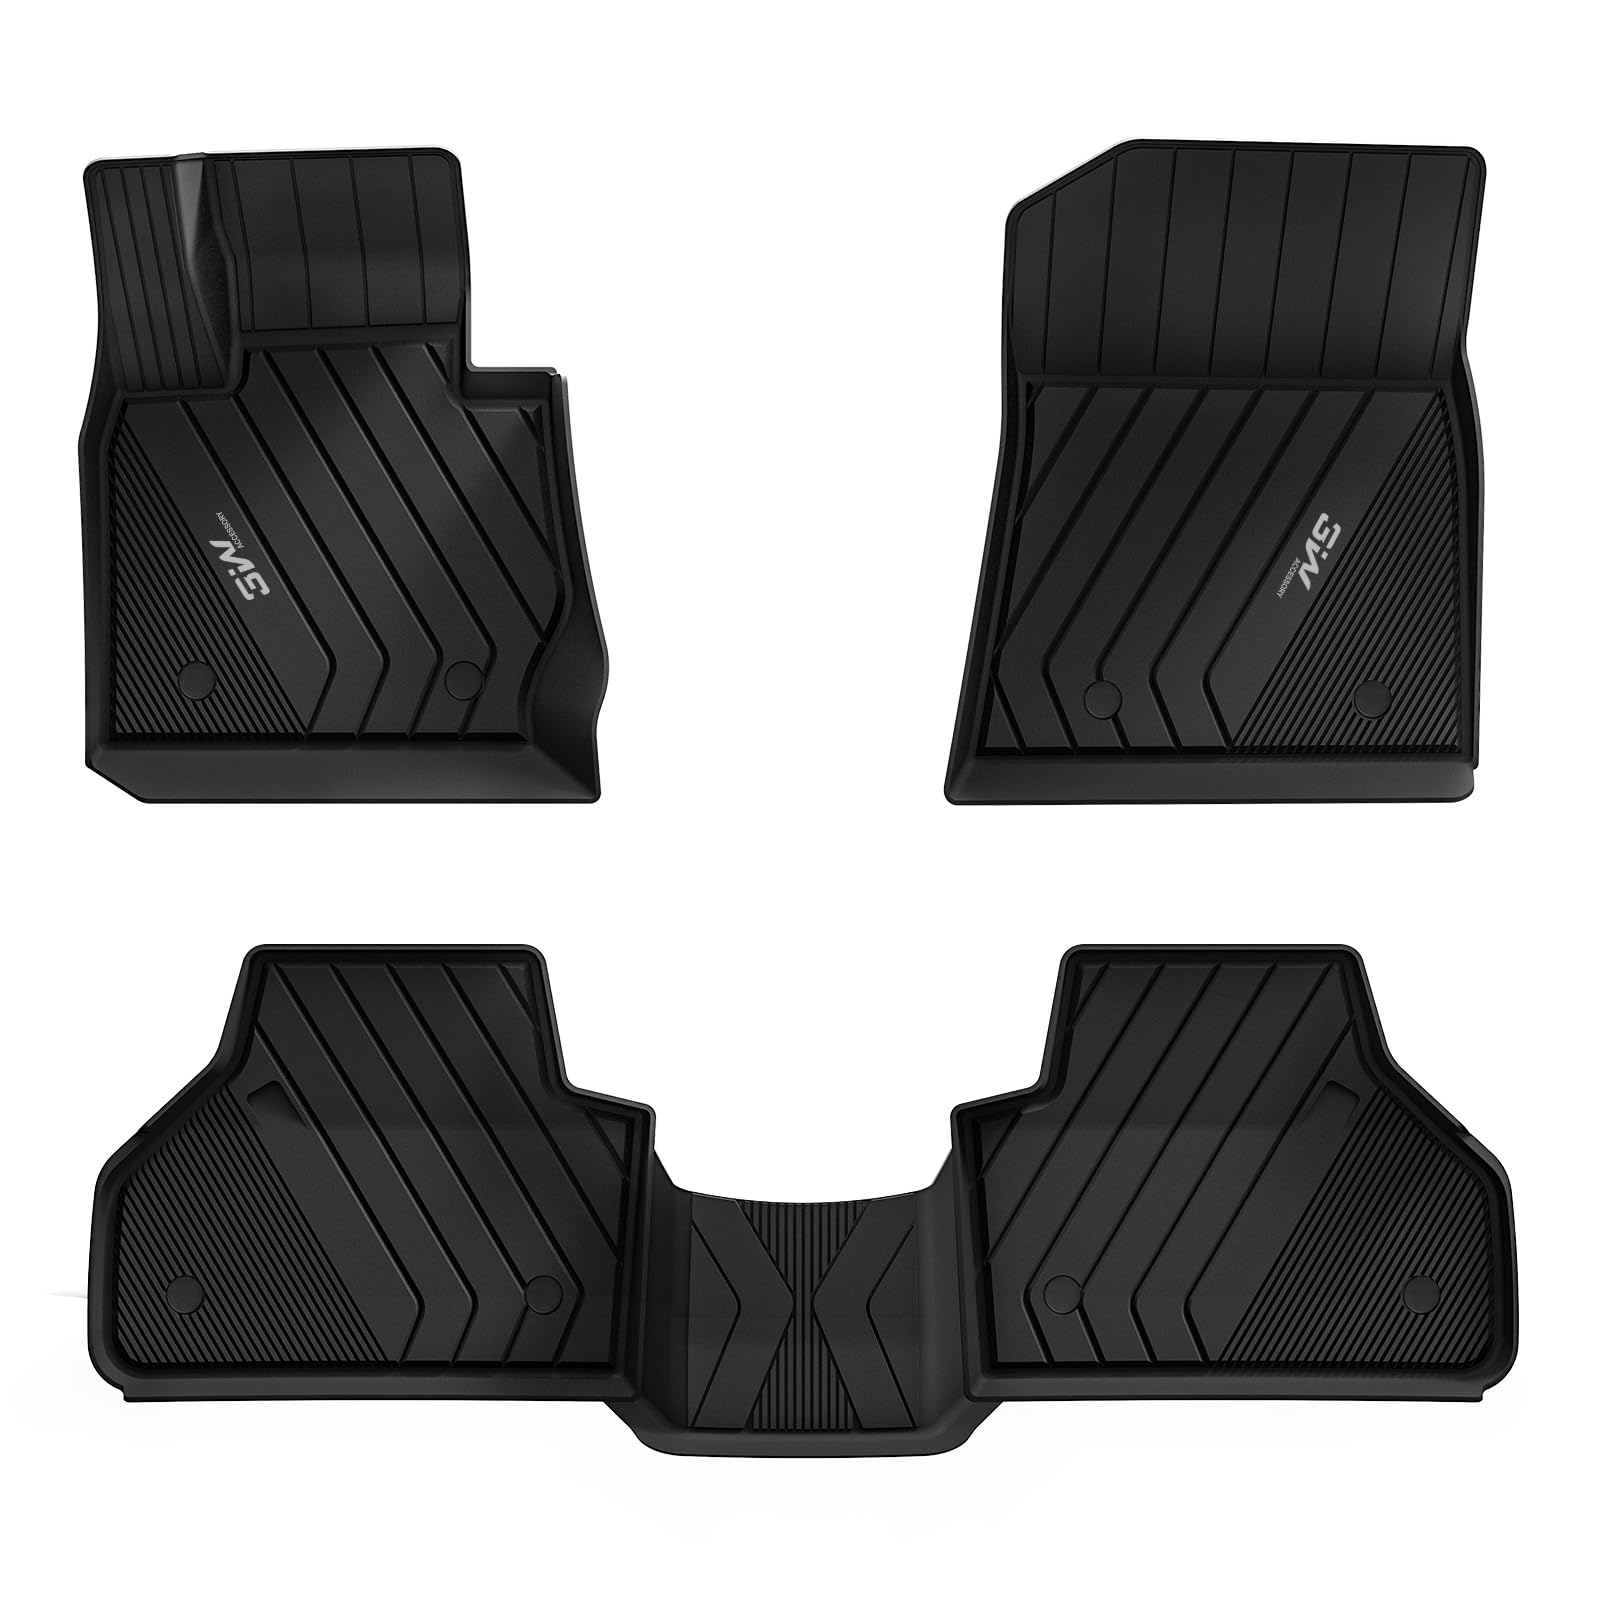 3W BMW X4 2015-2018 Custom Floor Mats TPE Material & All-Weather Protection Vehicles & Parts 3W 2015-2018 X4 2015-2018 1st&2nd Row Mats